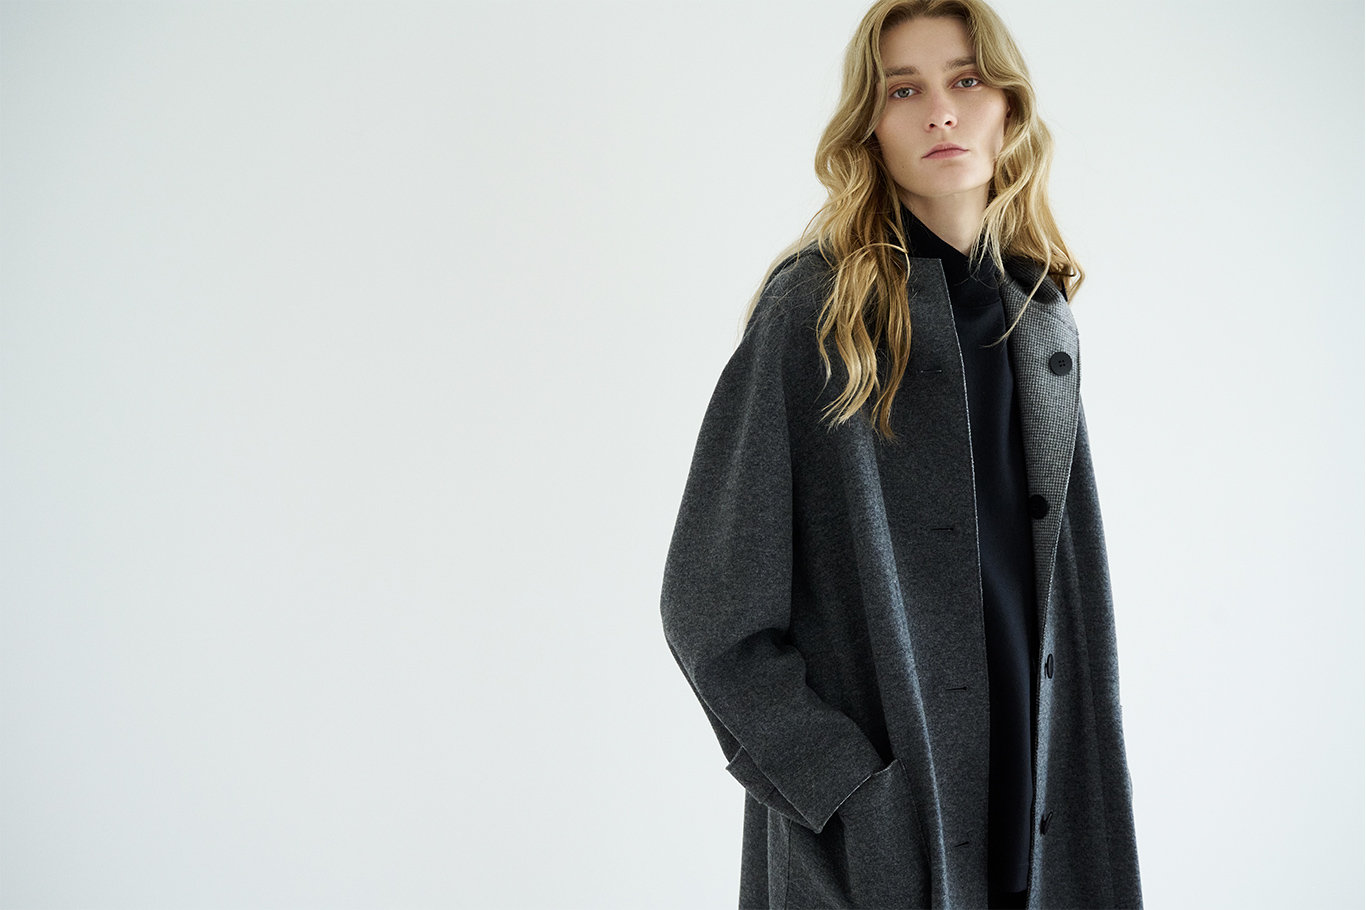 PERFECT DUFFLE COAT | Theory luxe（セオリーリュクス）公式通販サイト